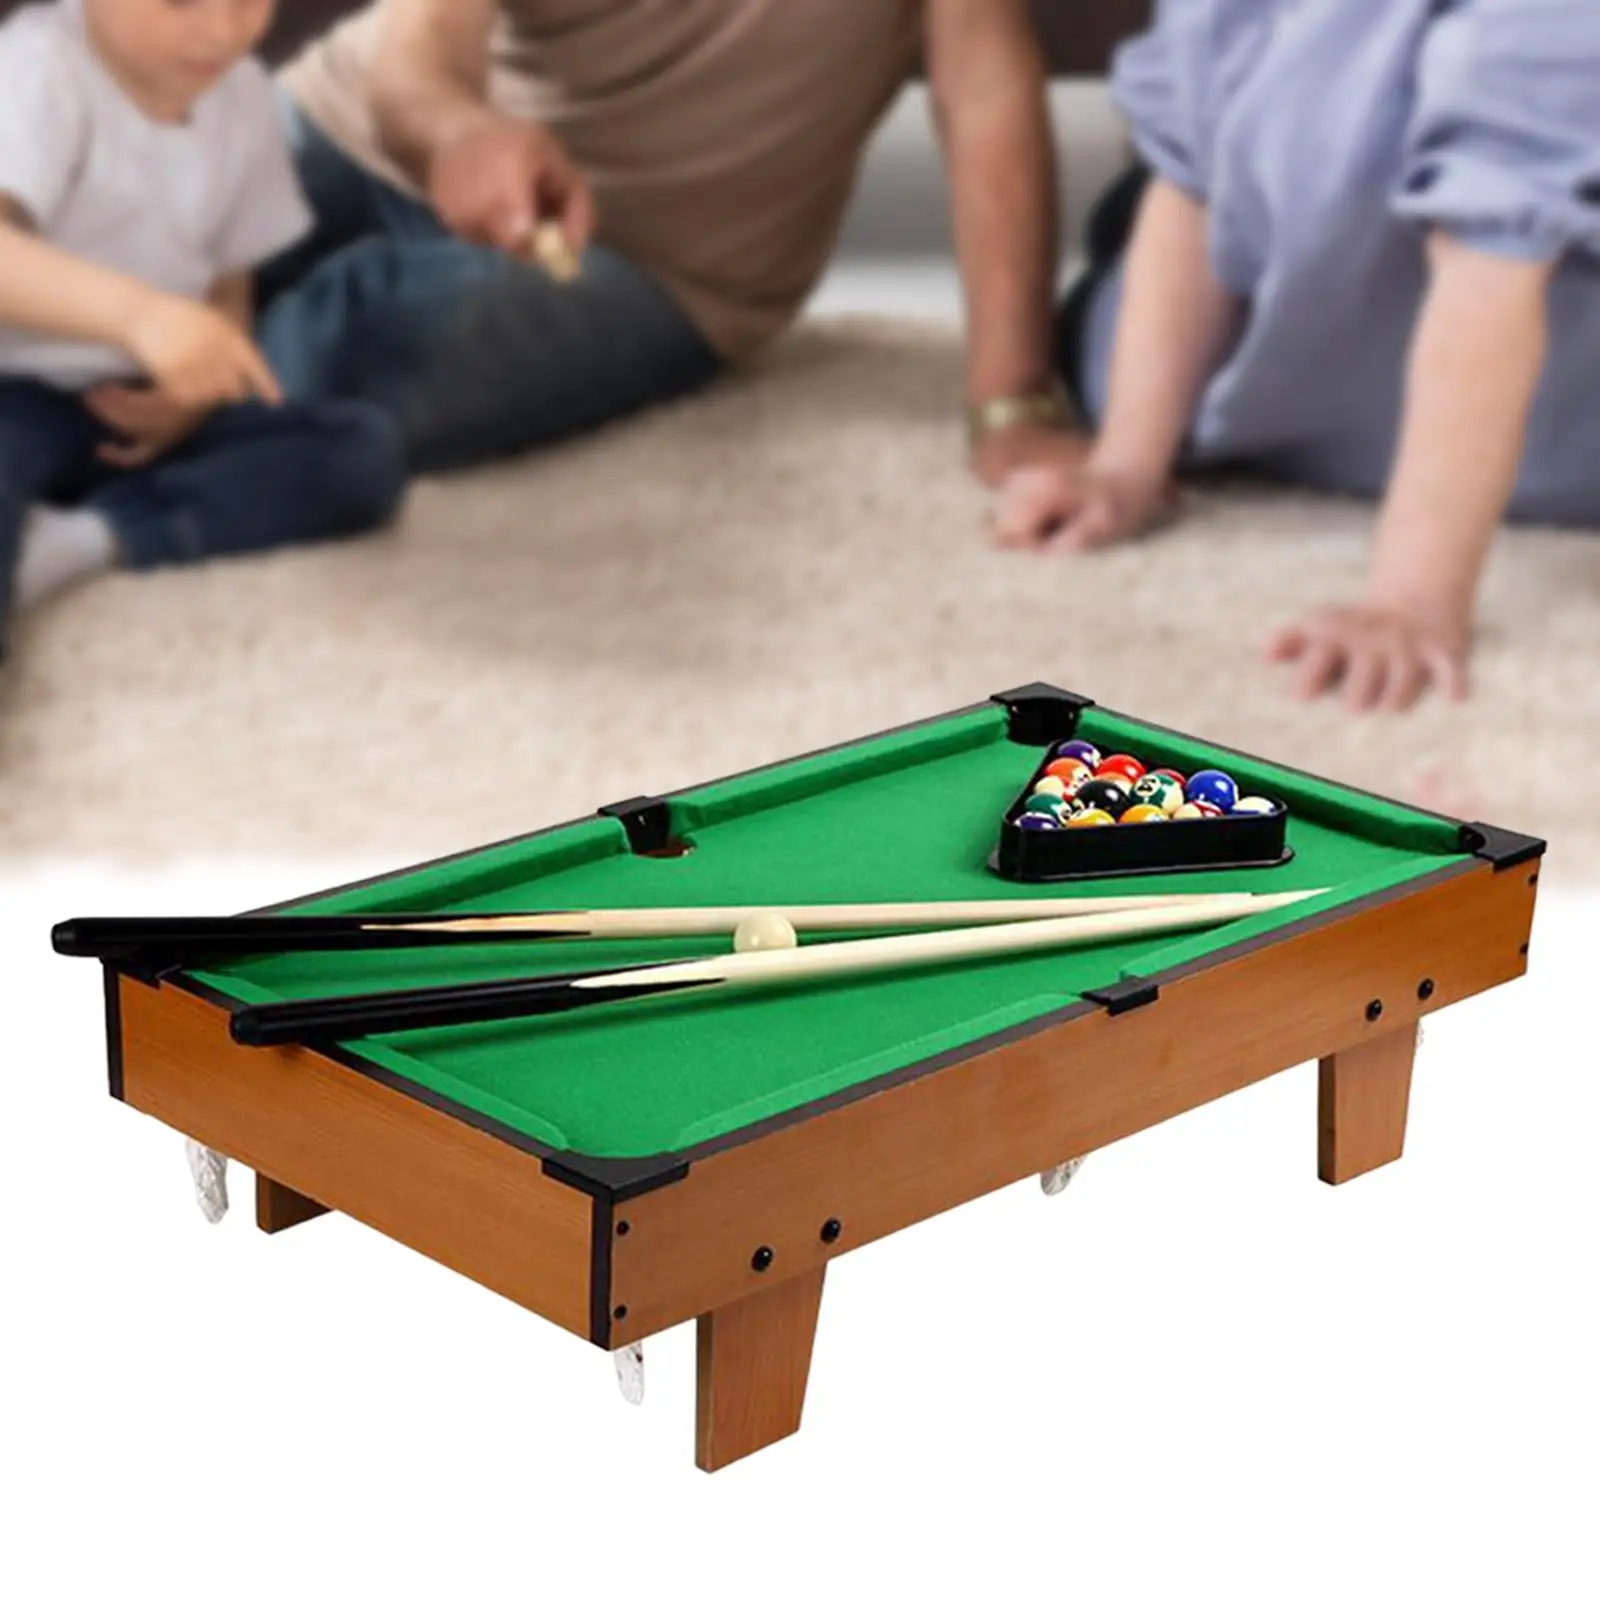 Pool Table Set Board Games Leisure Wood Small Tabletop Billiards for Family